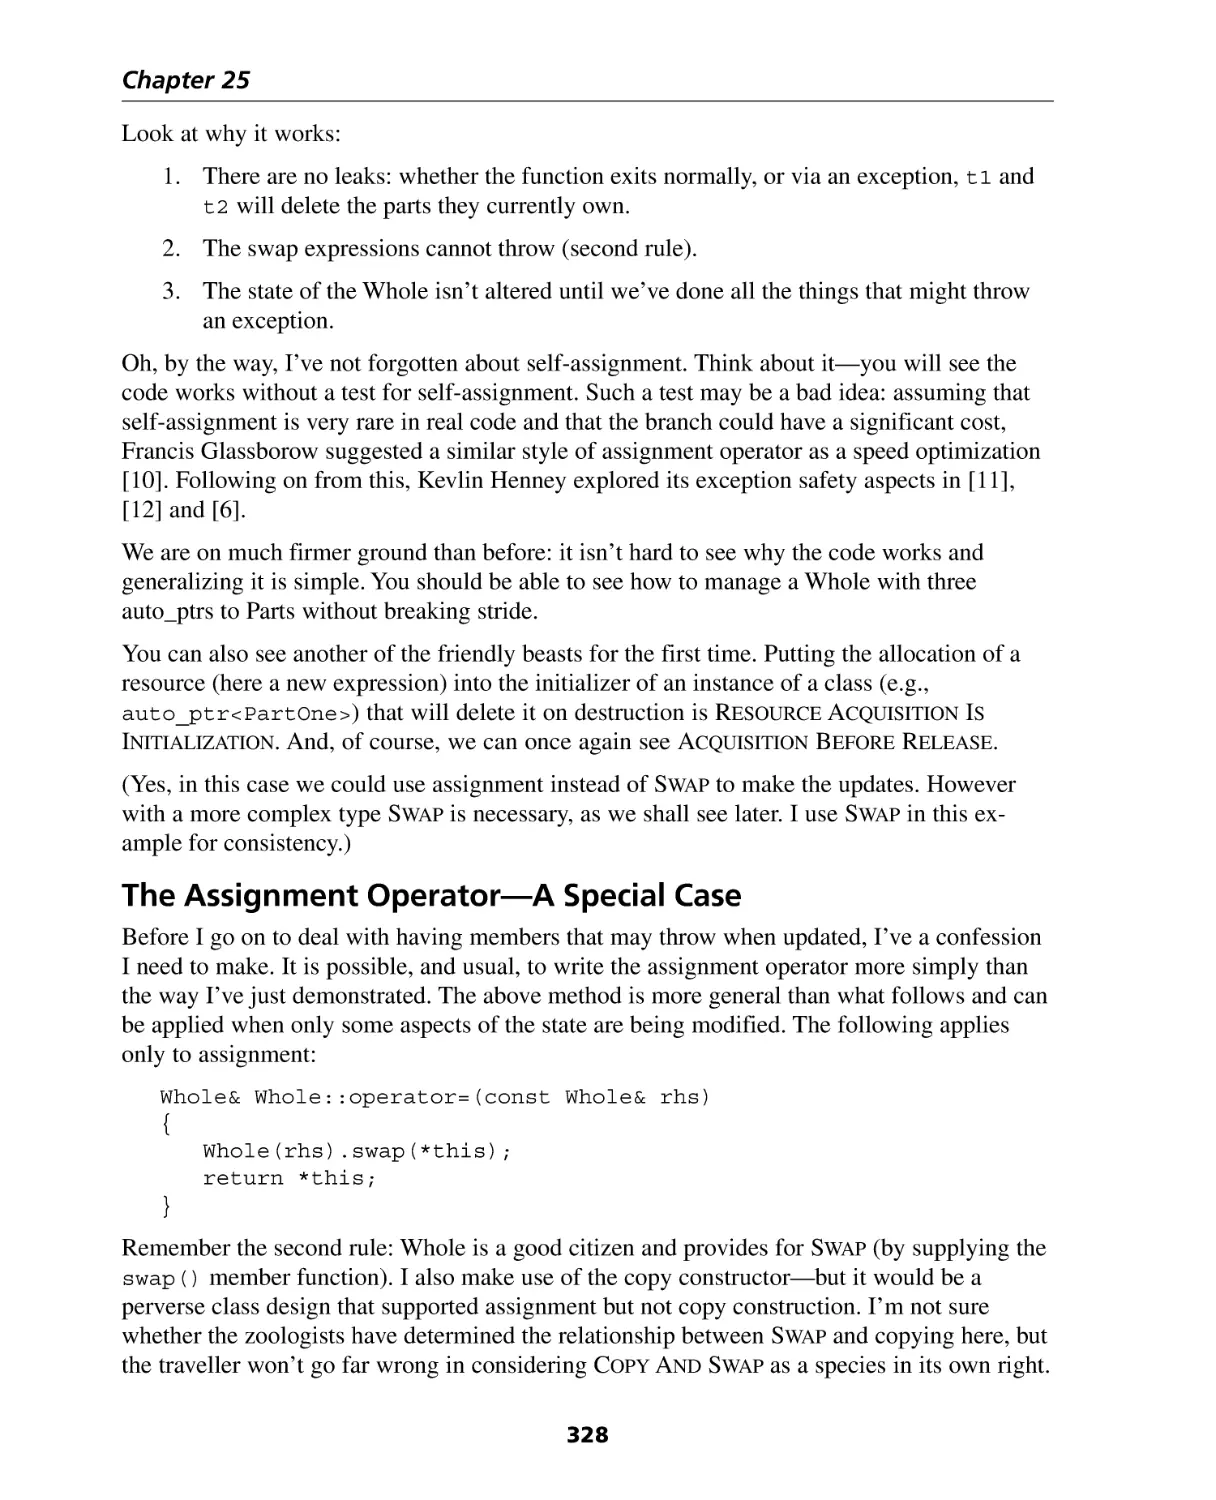 The Assignment Operator—A Special Case